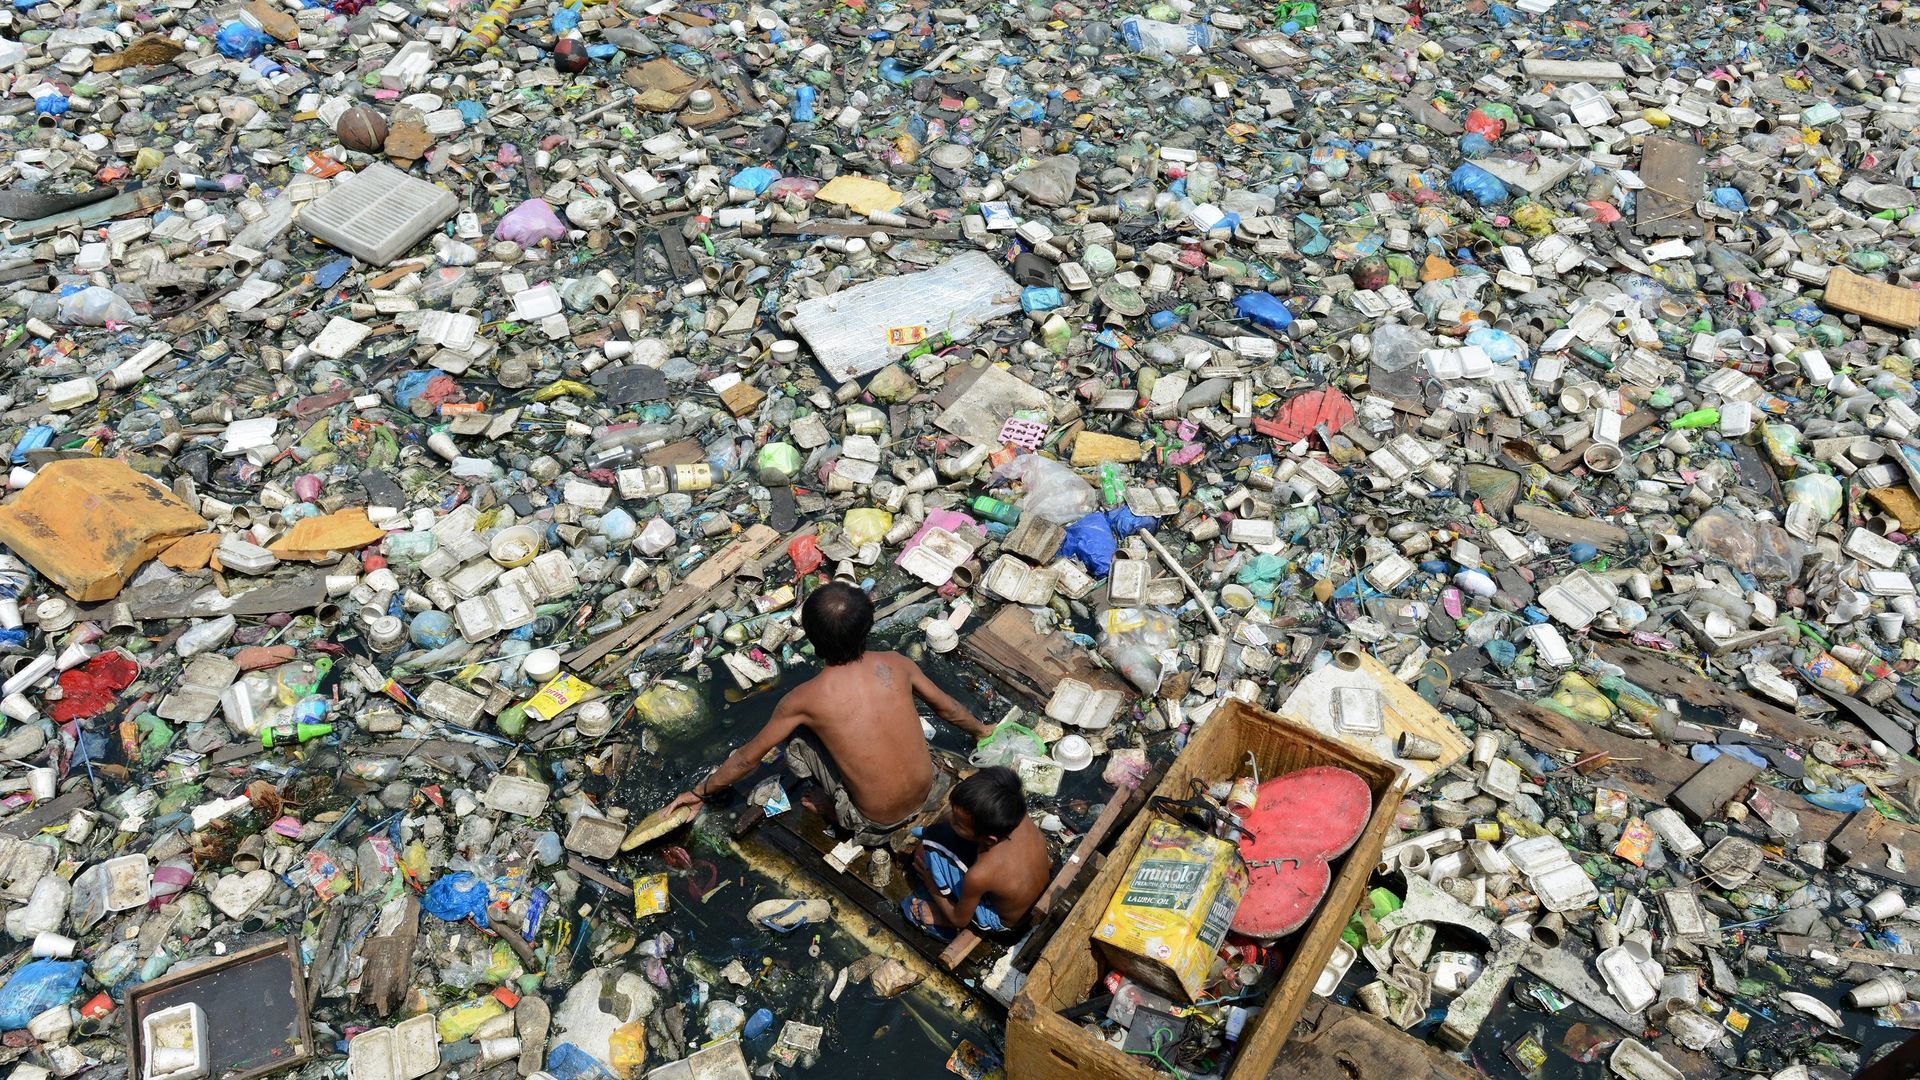 A father and son on a makeshift boat paddle through a garbage filled river as they collect plastic bottles that they can sell in junkshops in Manila.